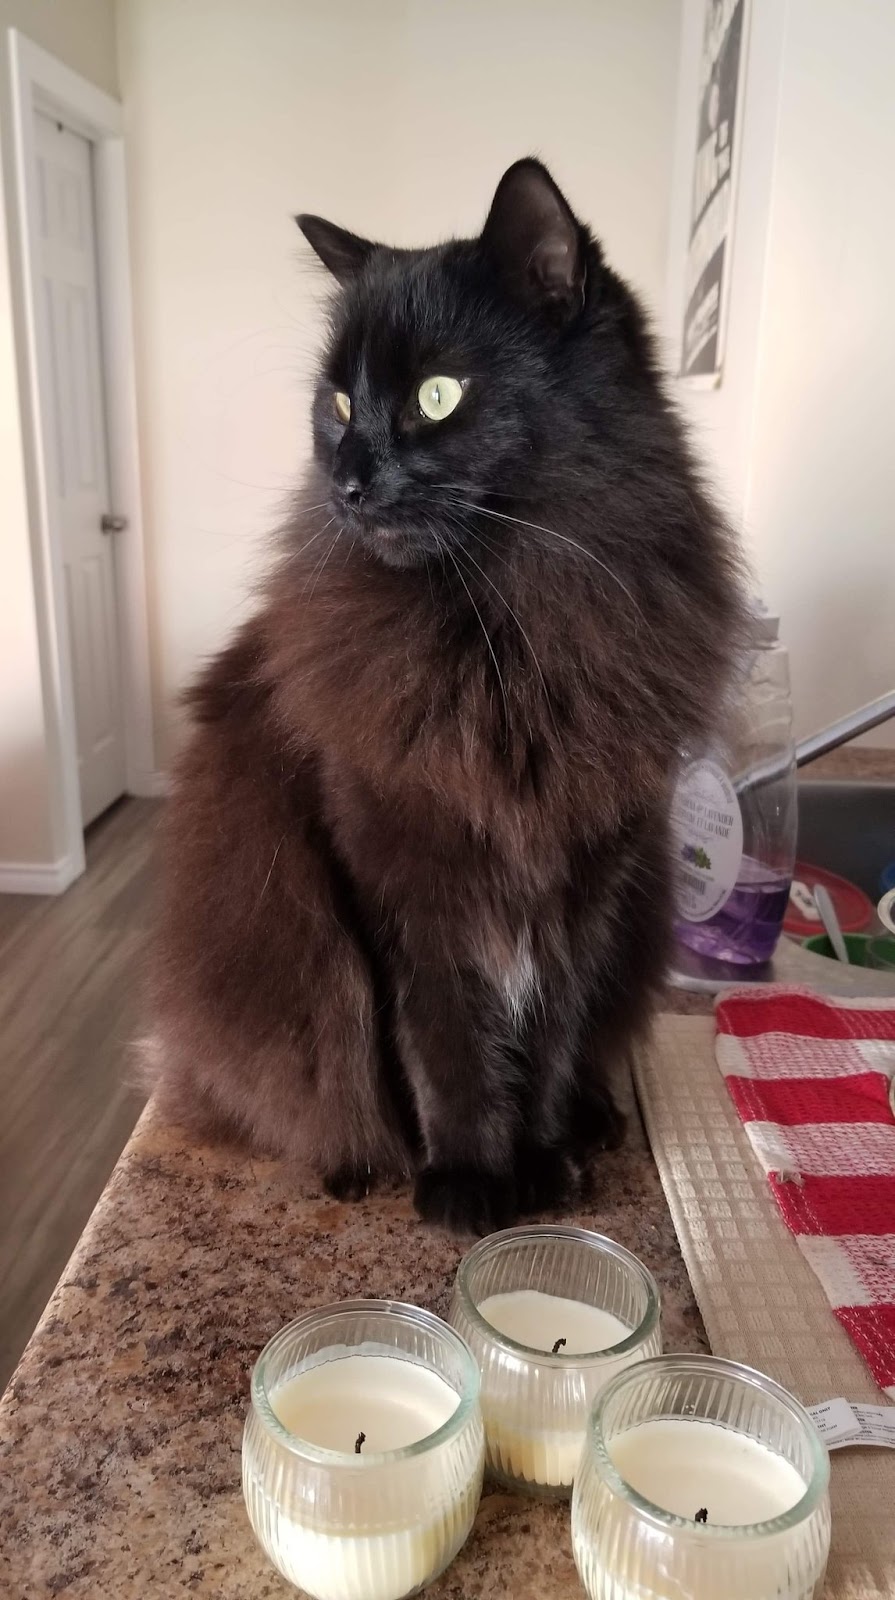 Boris the Blade is a black cat with a striking long coat